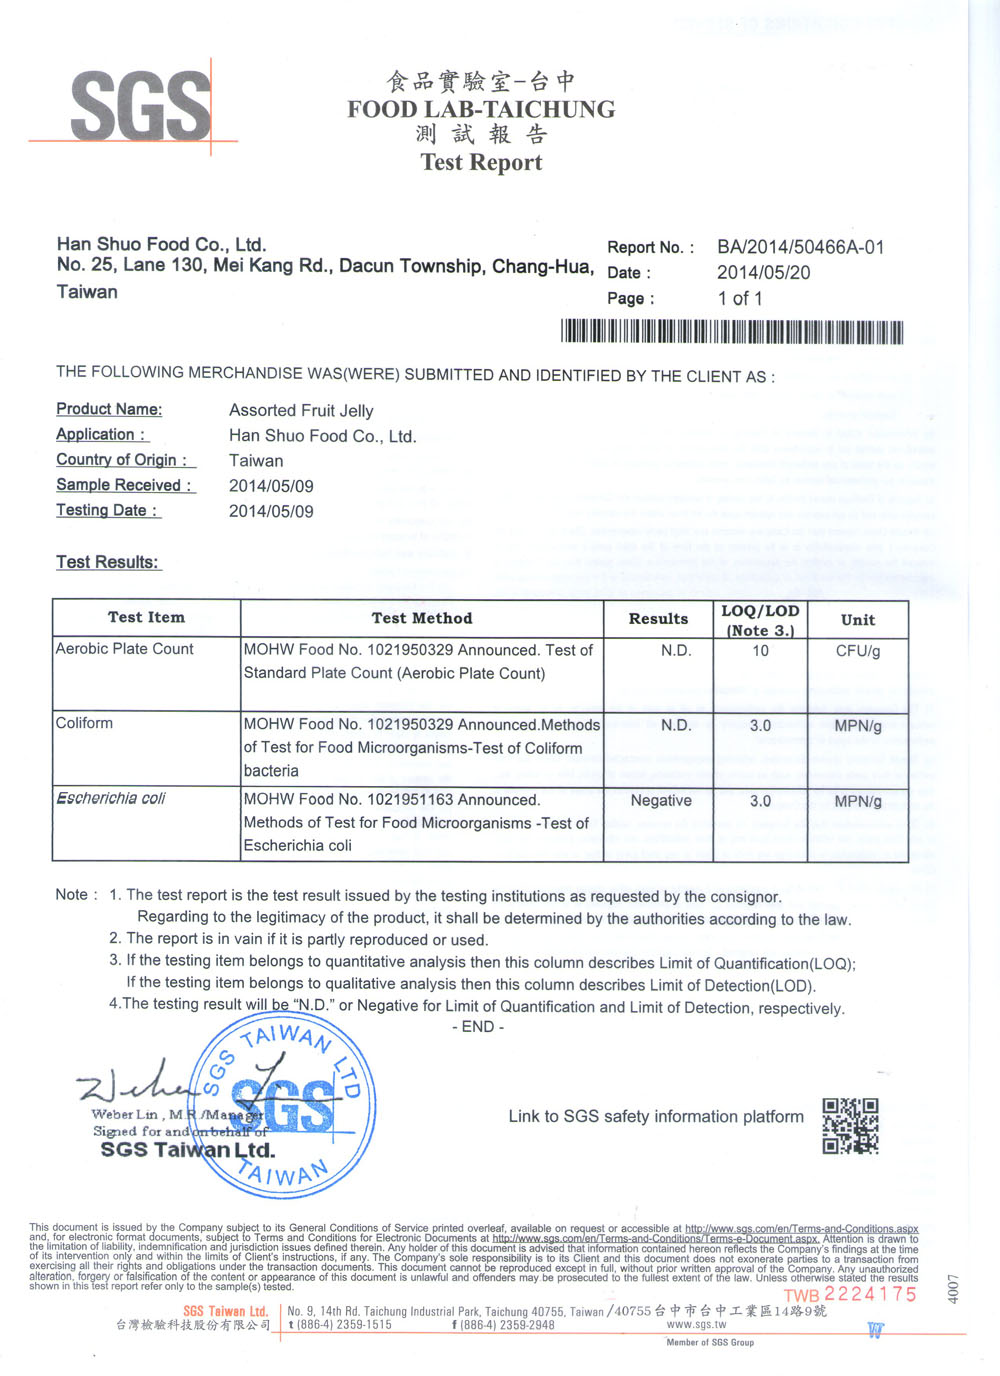 SGS Test Report Assorted Fruit Jelly 2014/5/20